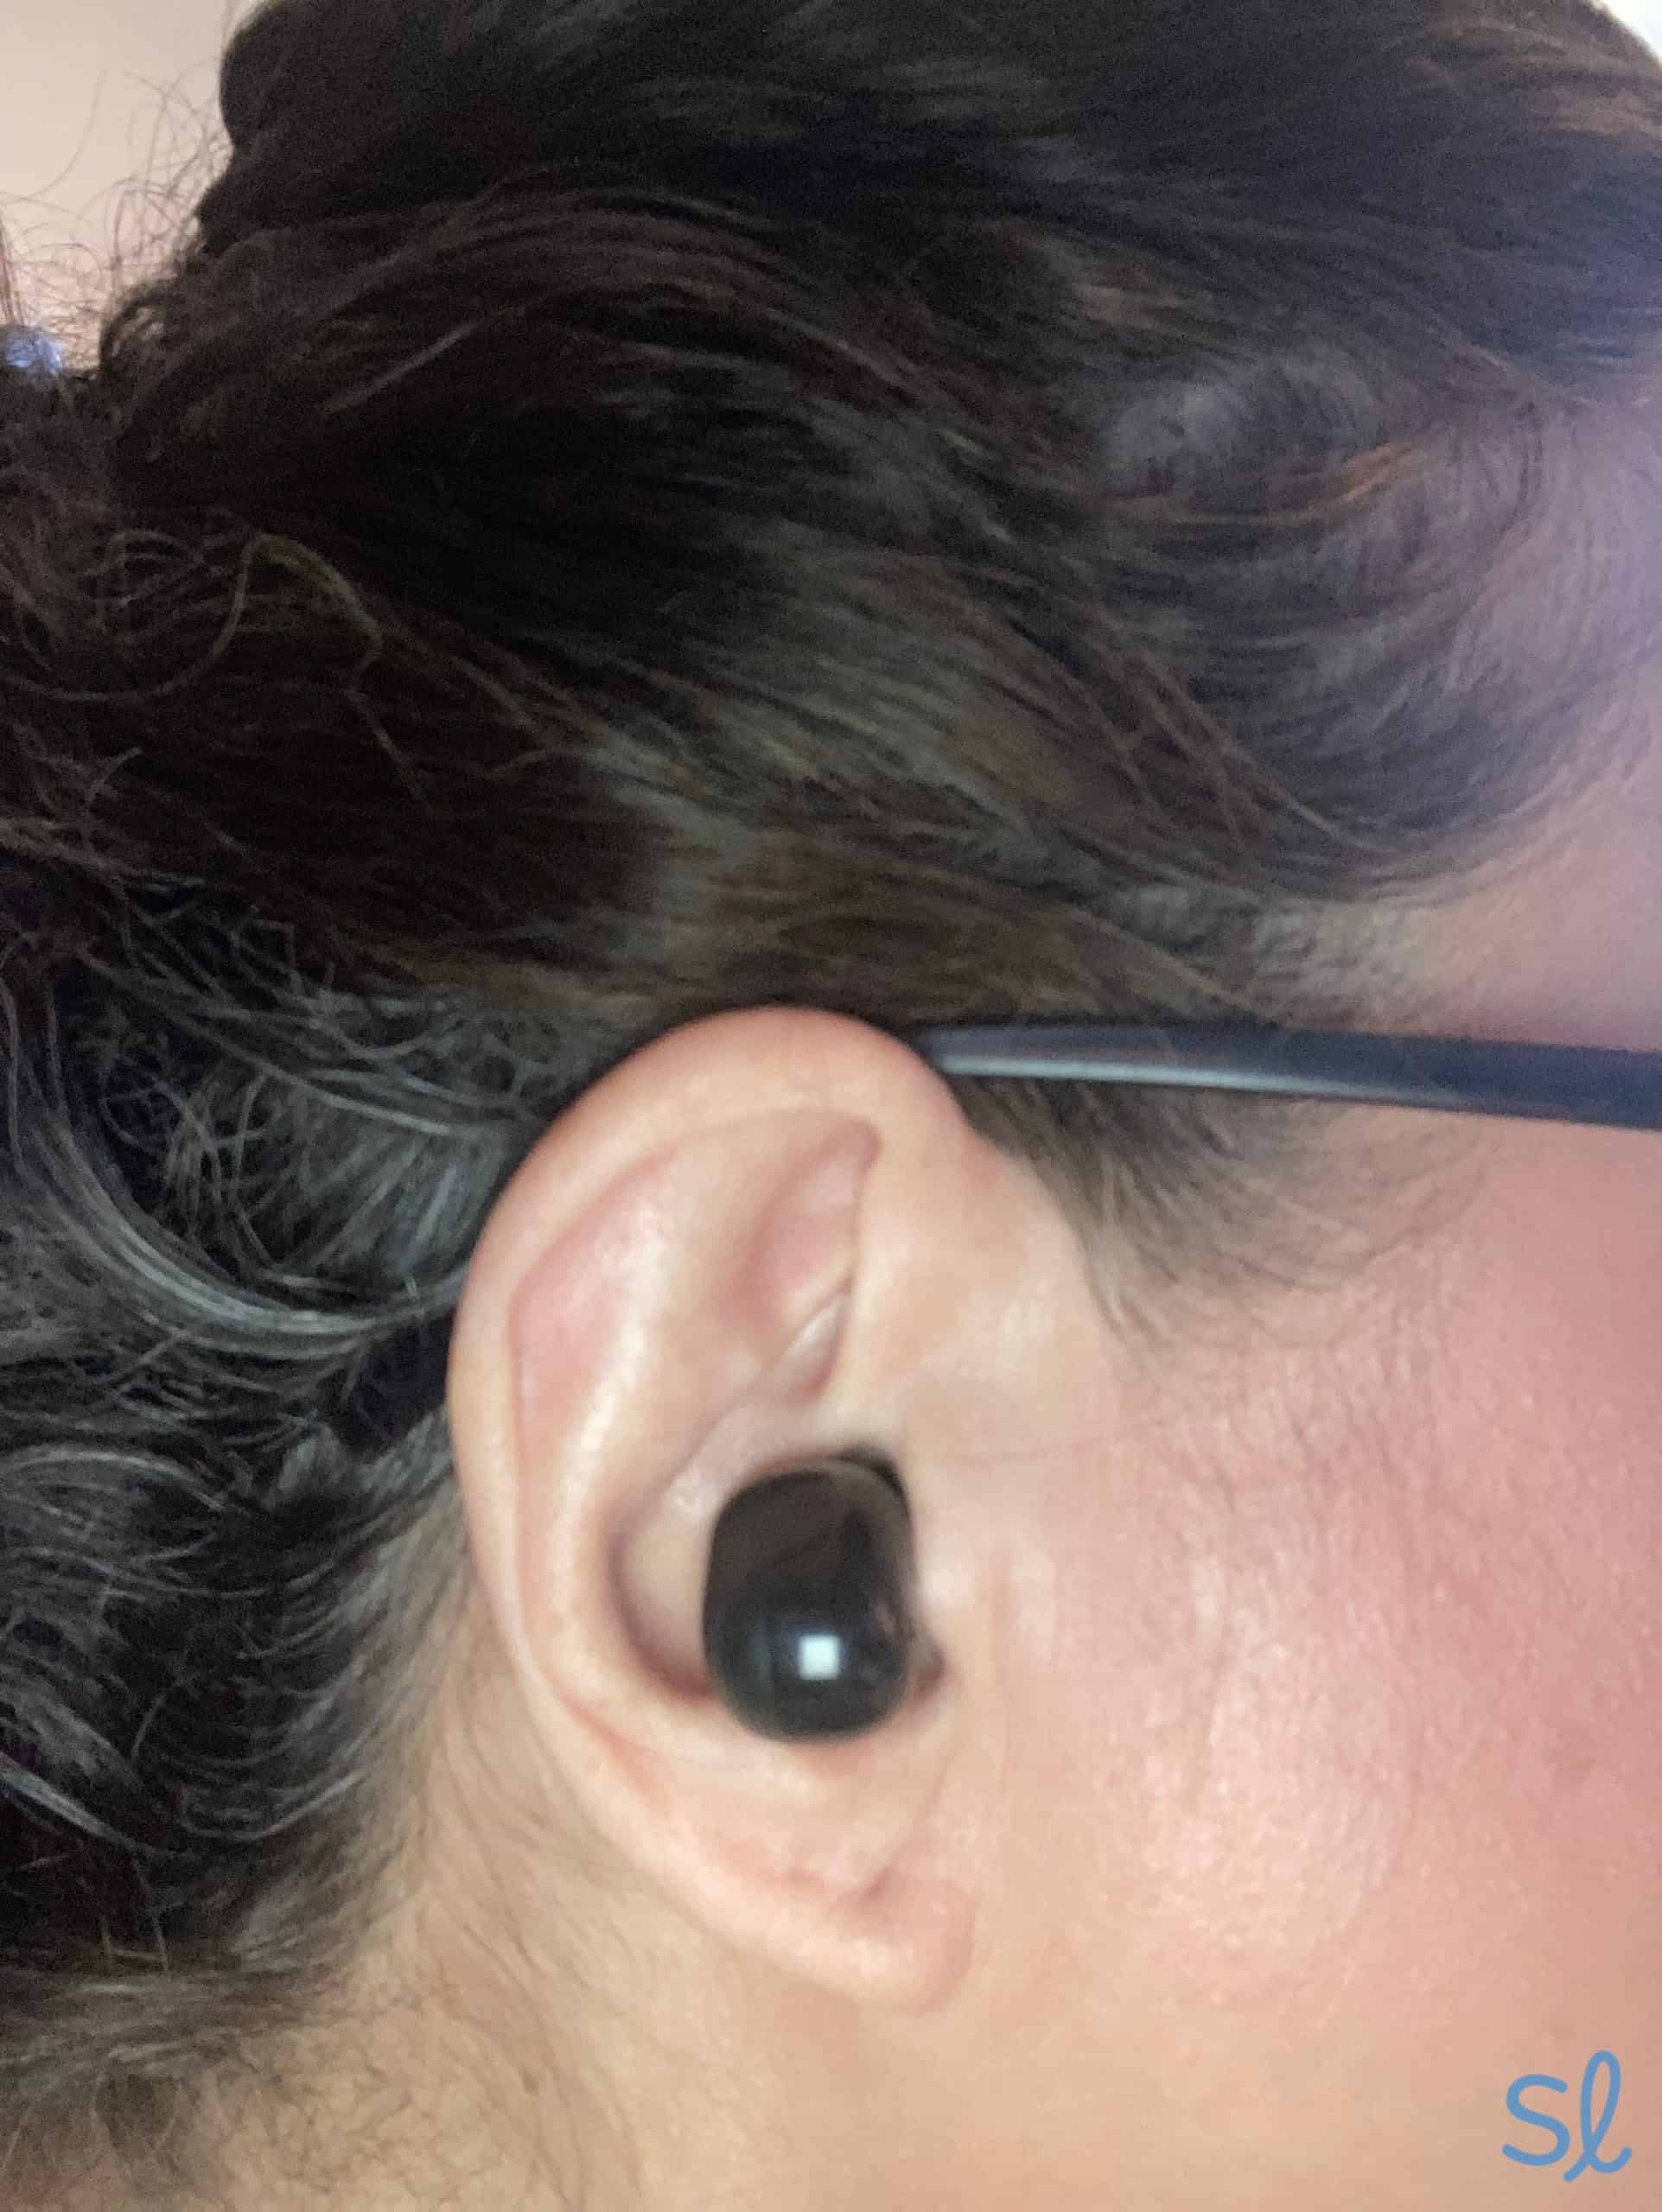 One of our testers wearing LINK by Eargo hearing aids 